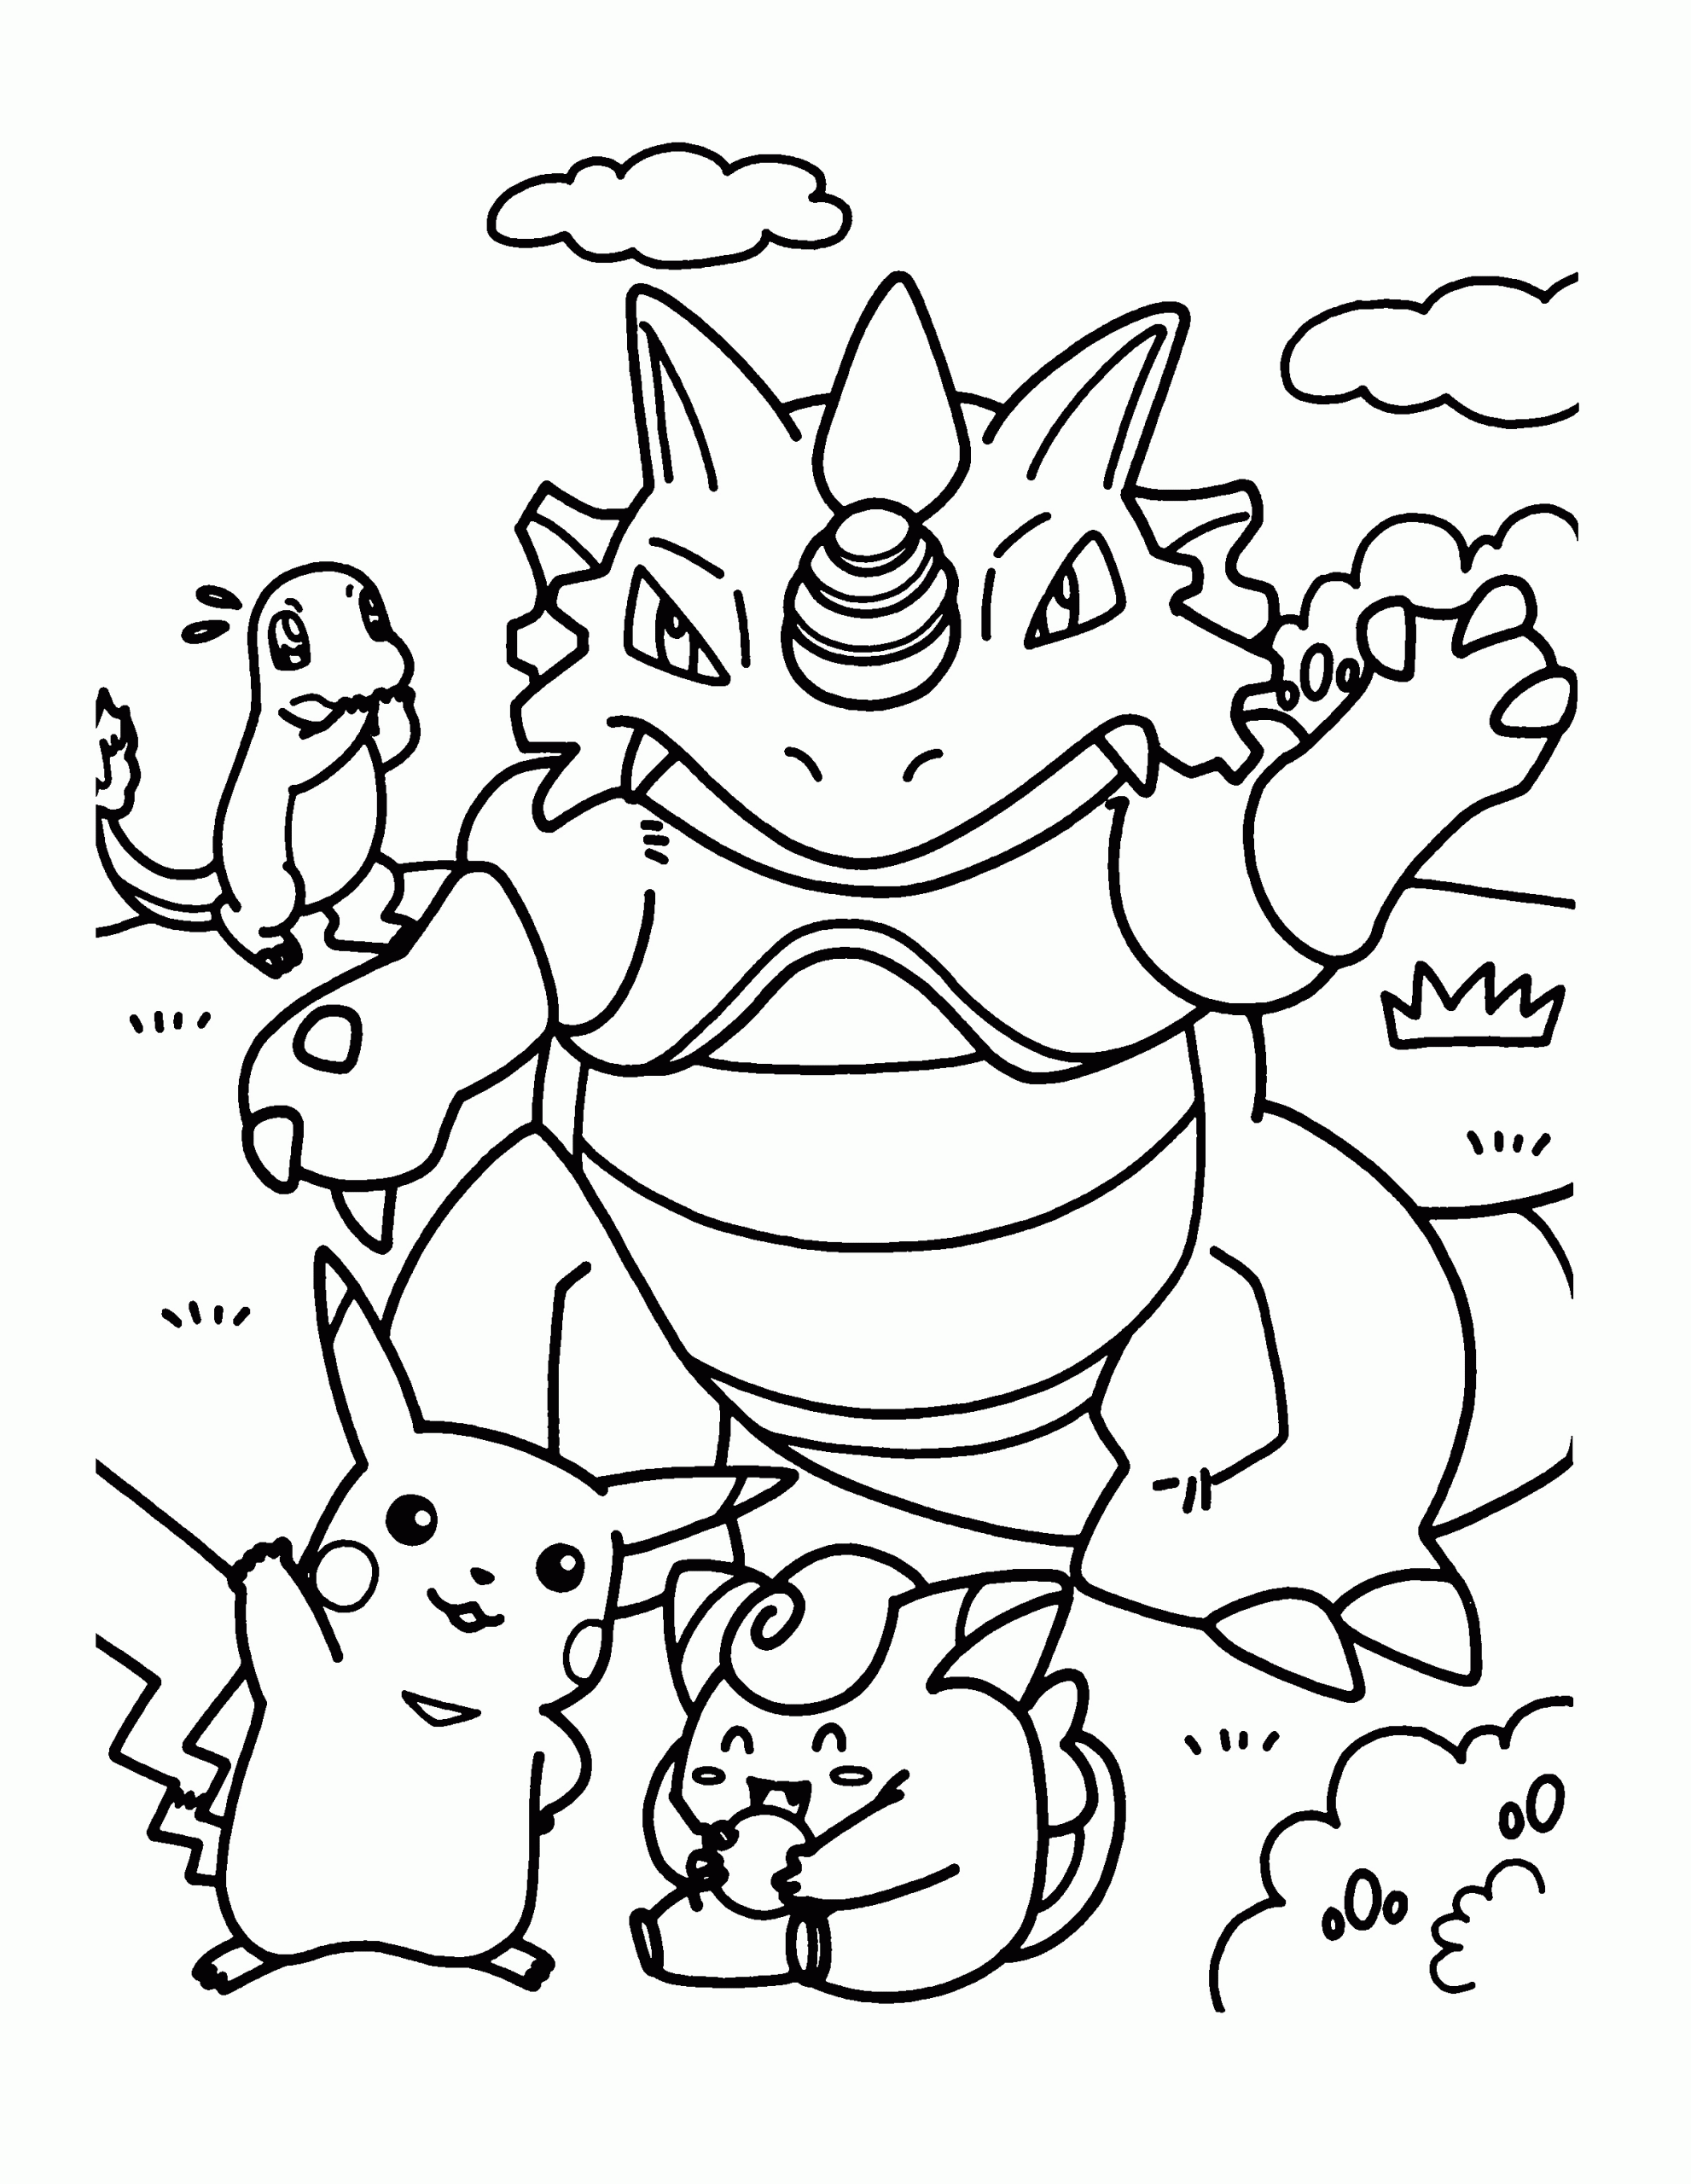 Coloring Pages For Kids Pokemon
 Pokemon Coloring Pages Join your favorite Pokemon on an